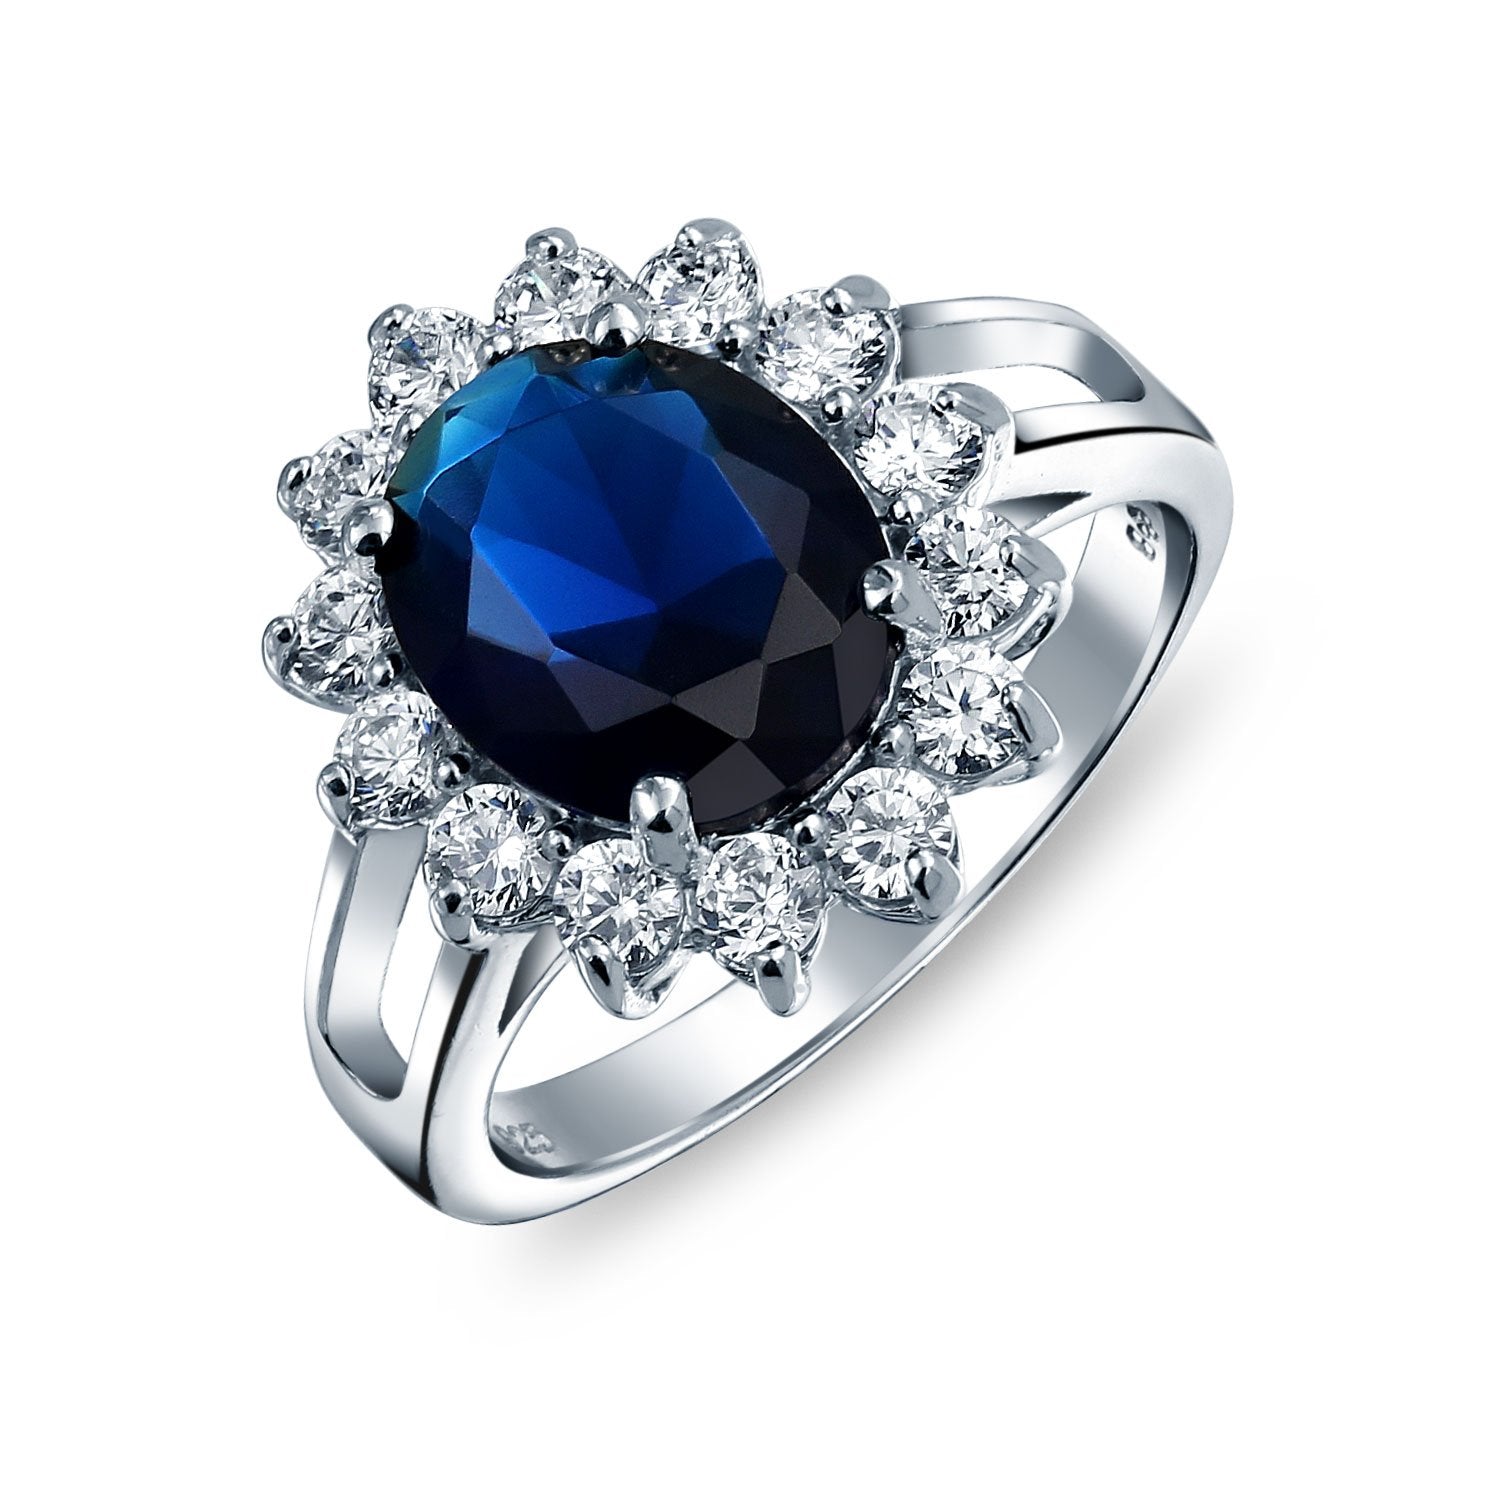 5CT Blue Oval Imitation Sapphire CZ Engagement Ring Sterling Silver - Joyeria Lady